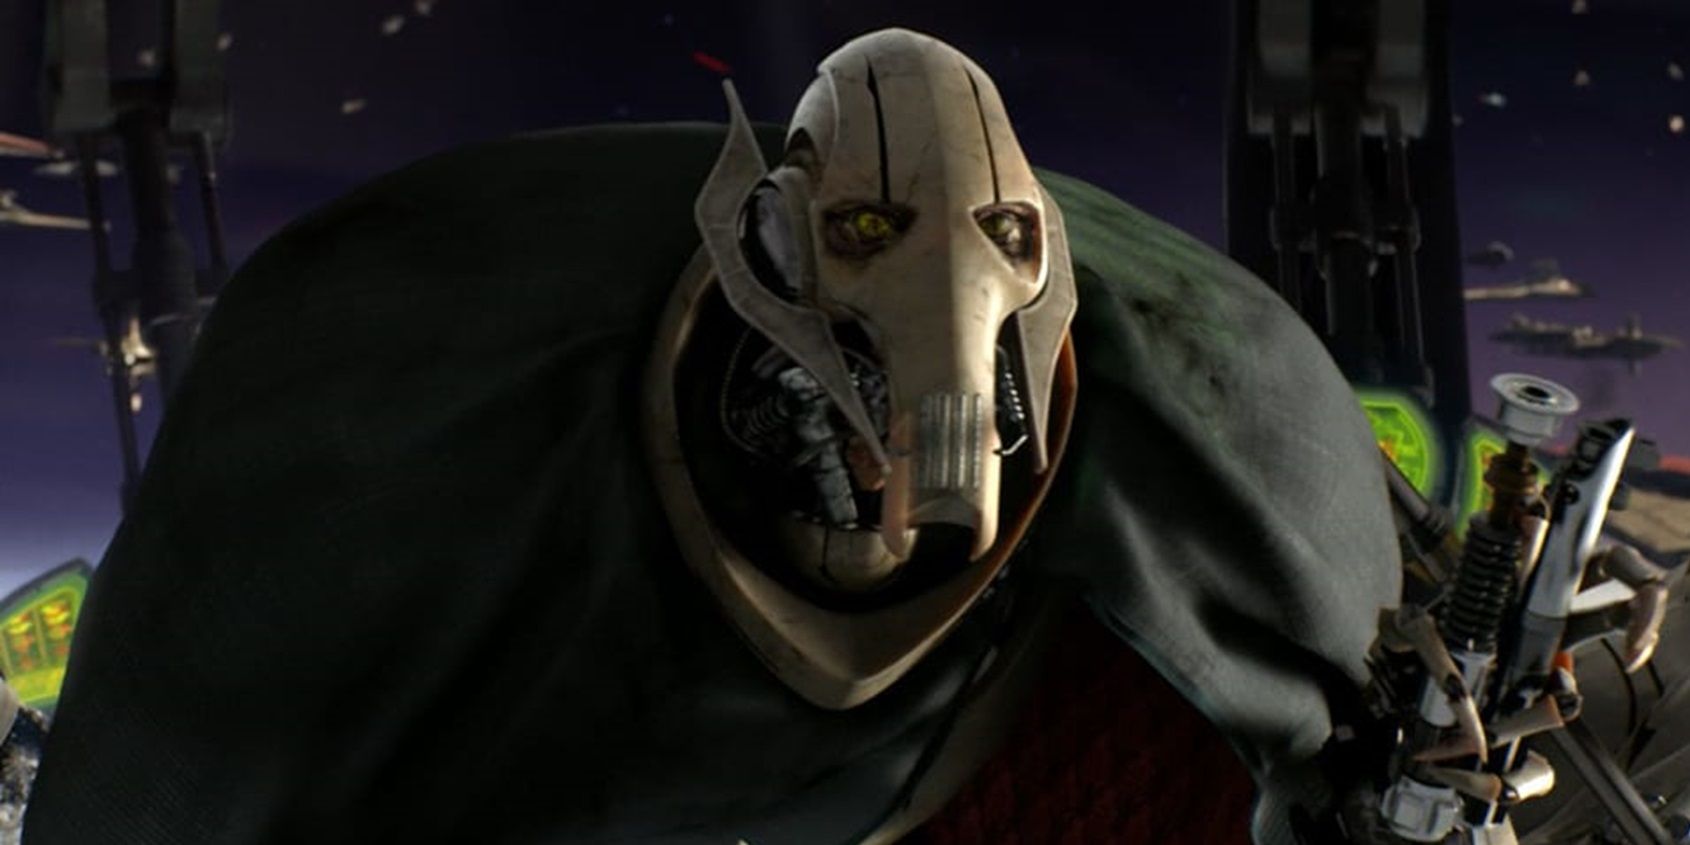 General Grievous on his ship in Revenge of the Sith